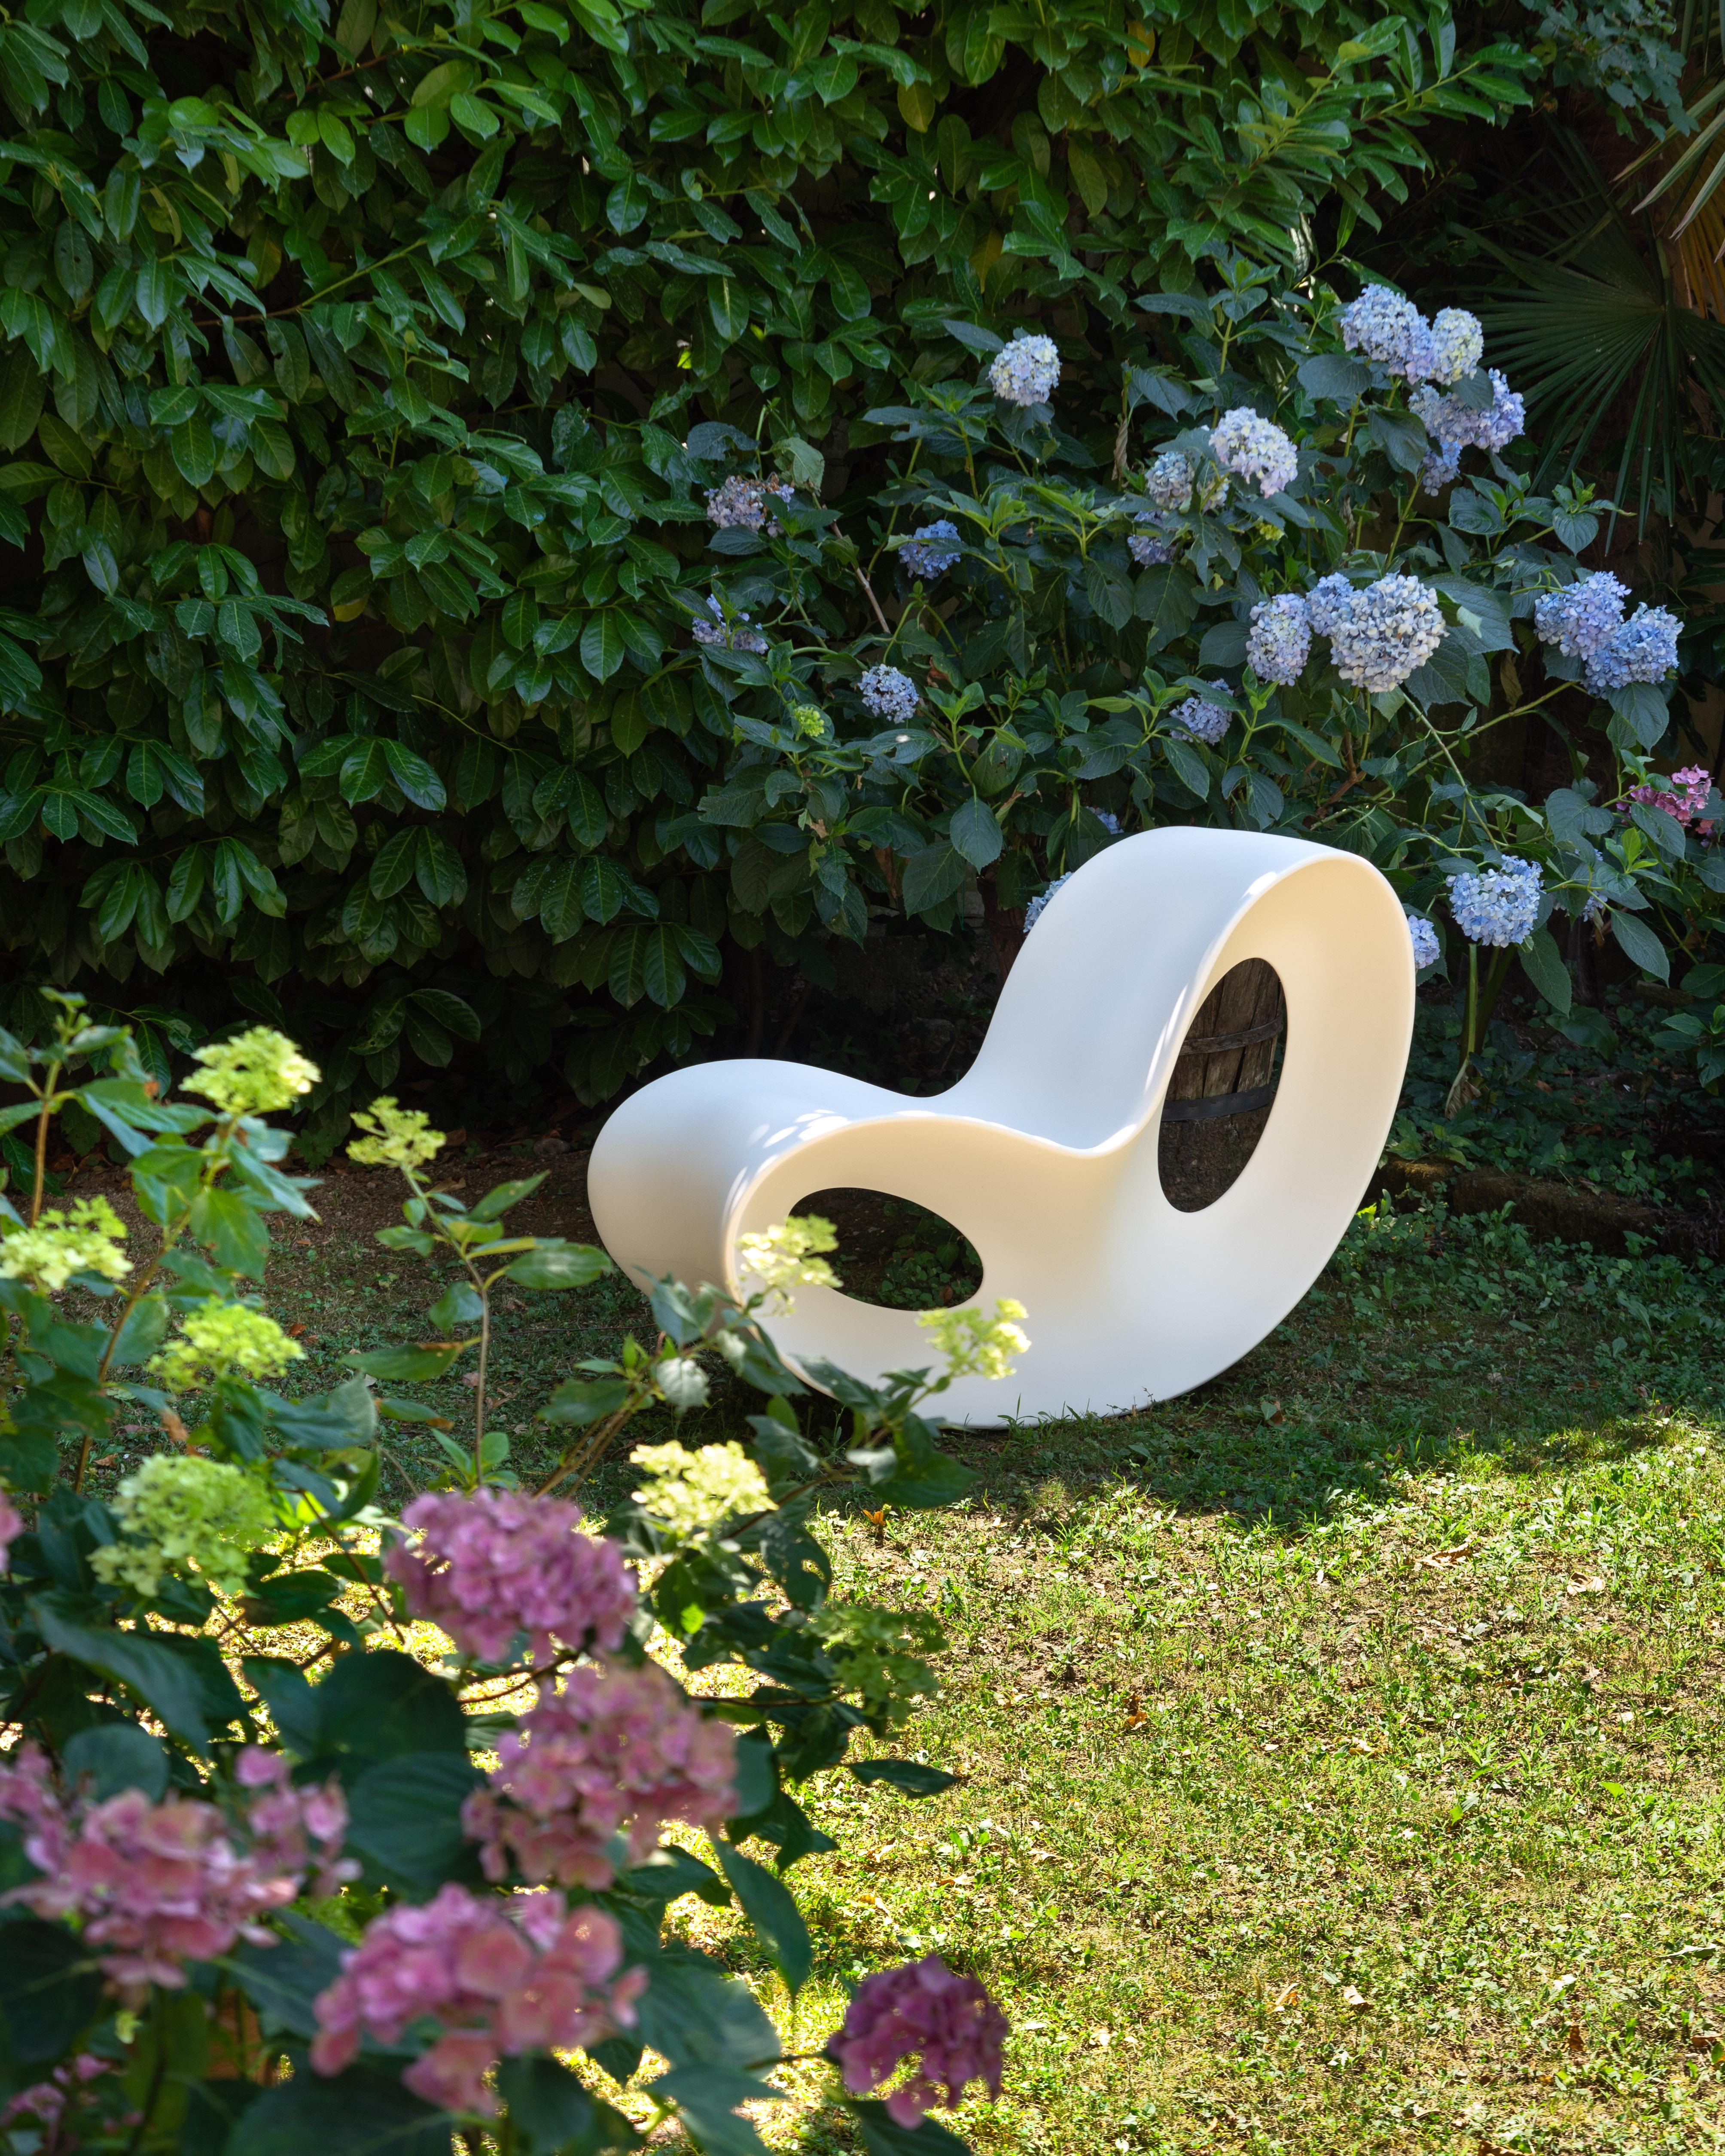 Created by Ron Arad, one of the biggest designers in the international arena, with his masterfully unconventional style, Voido is a rocking chair that looks like a piece of contemporary sculpture, but is made using industrial technology capable of